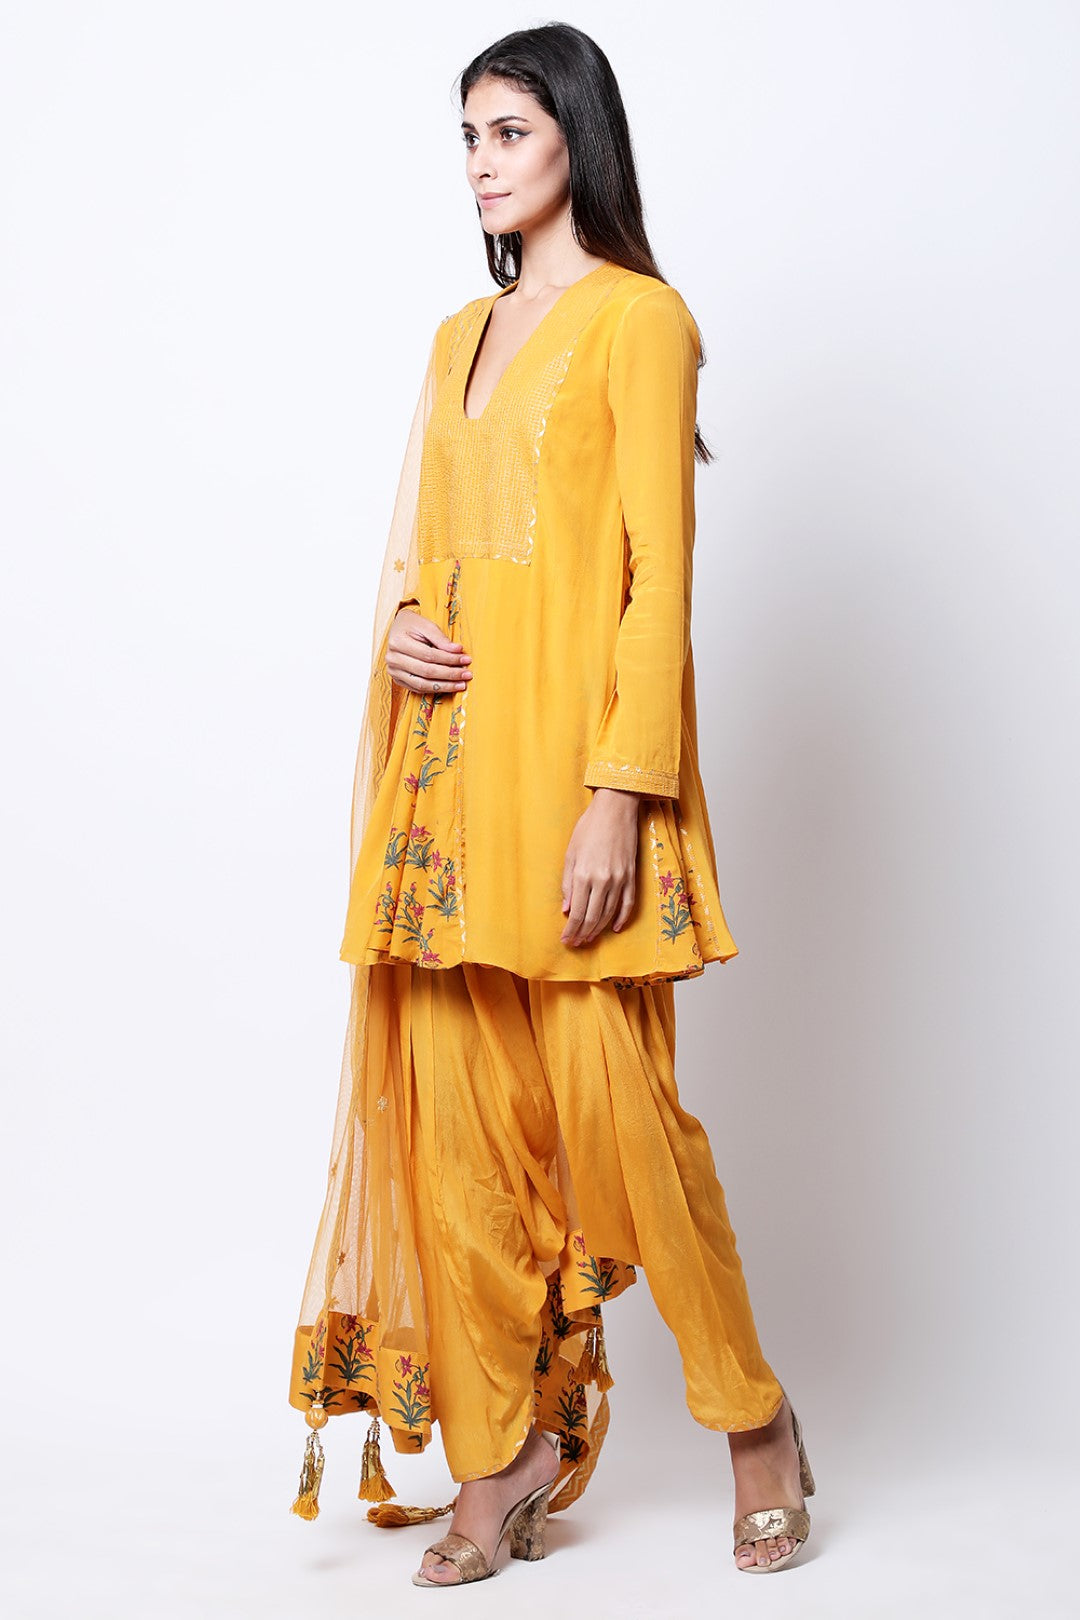 Ochre hand printed front and side godets kurta with mukesh embroidered dupatta and cowl dhoti.